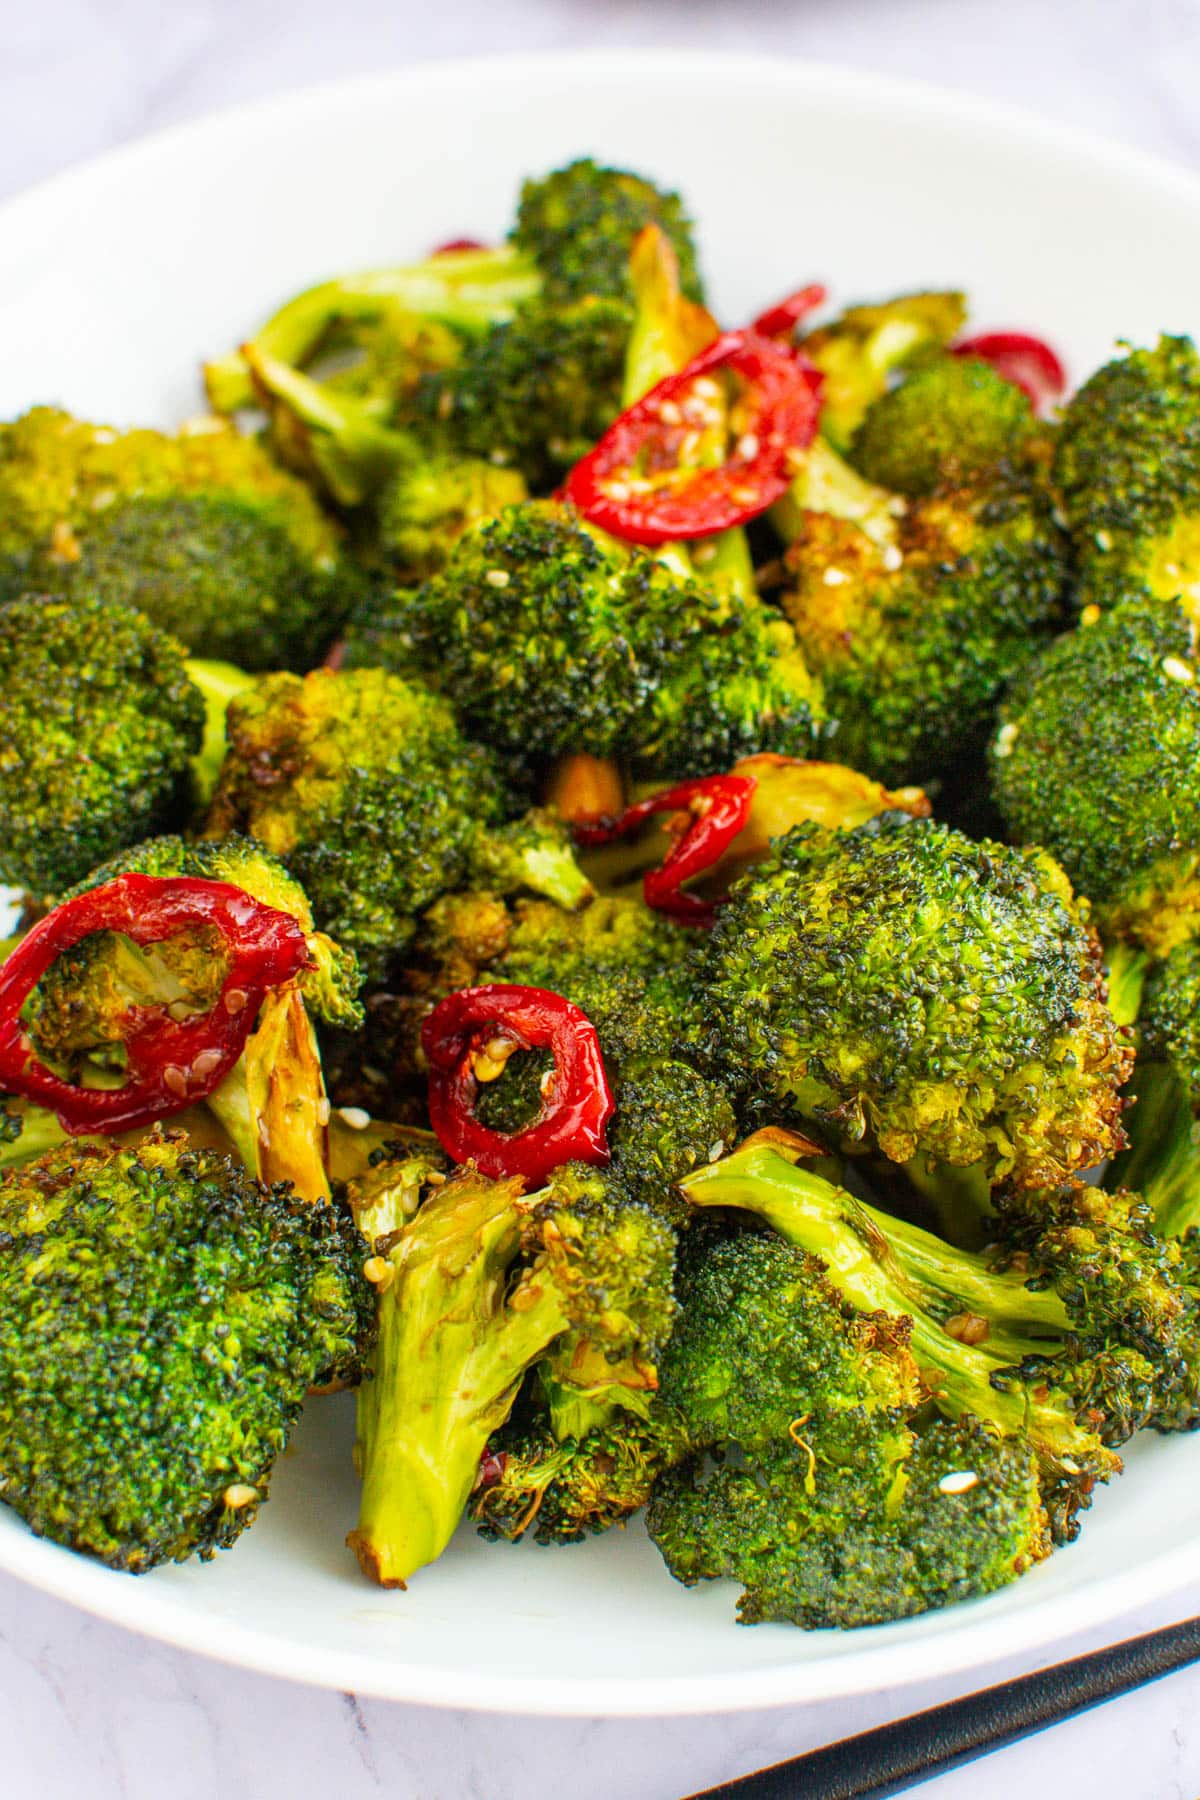 Broccoli with red hot pepper and sesame seeds on a white plate.